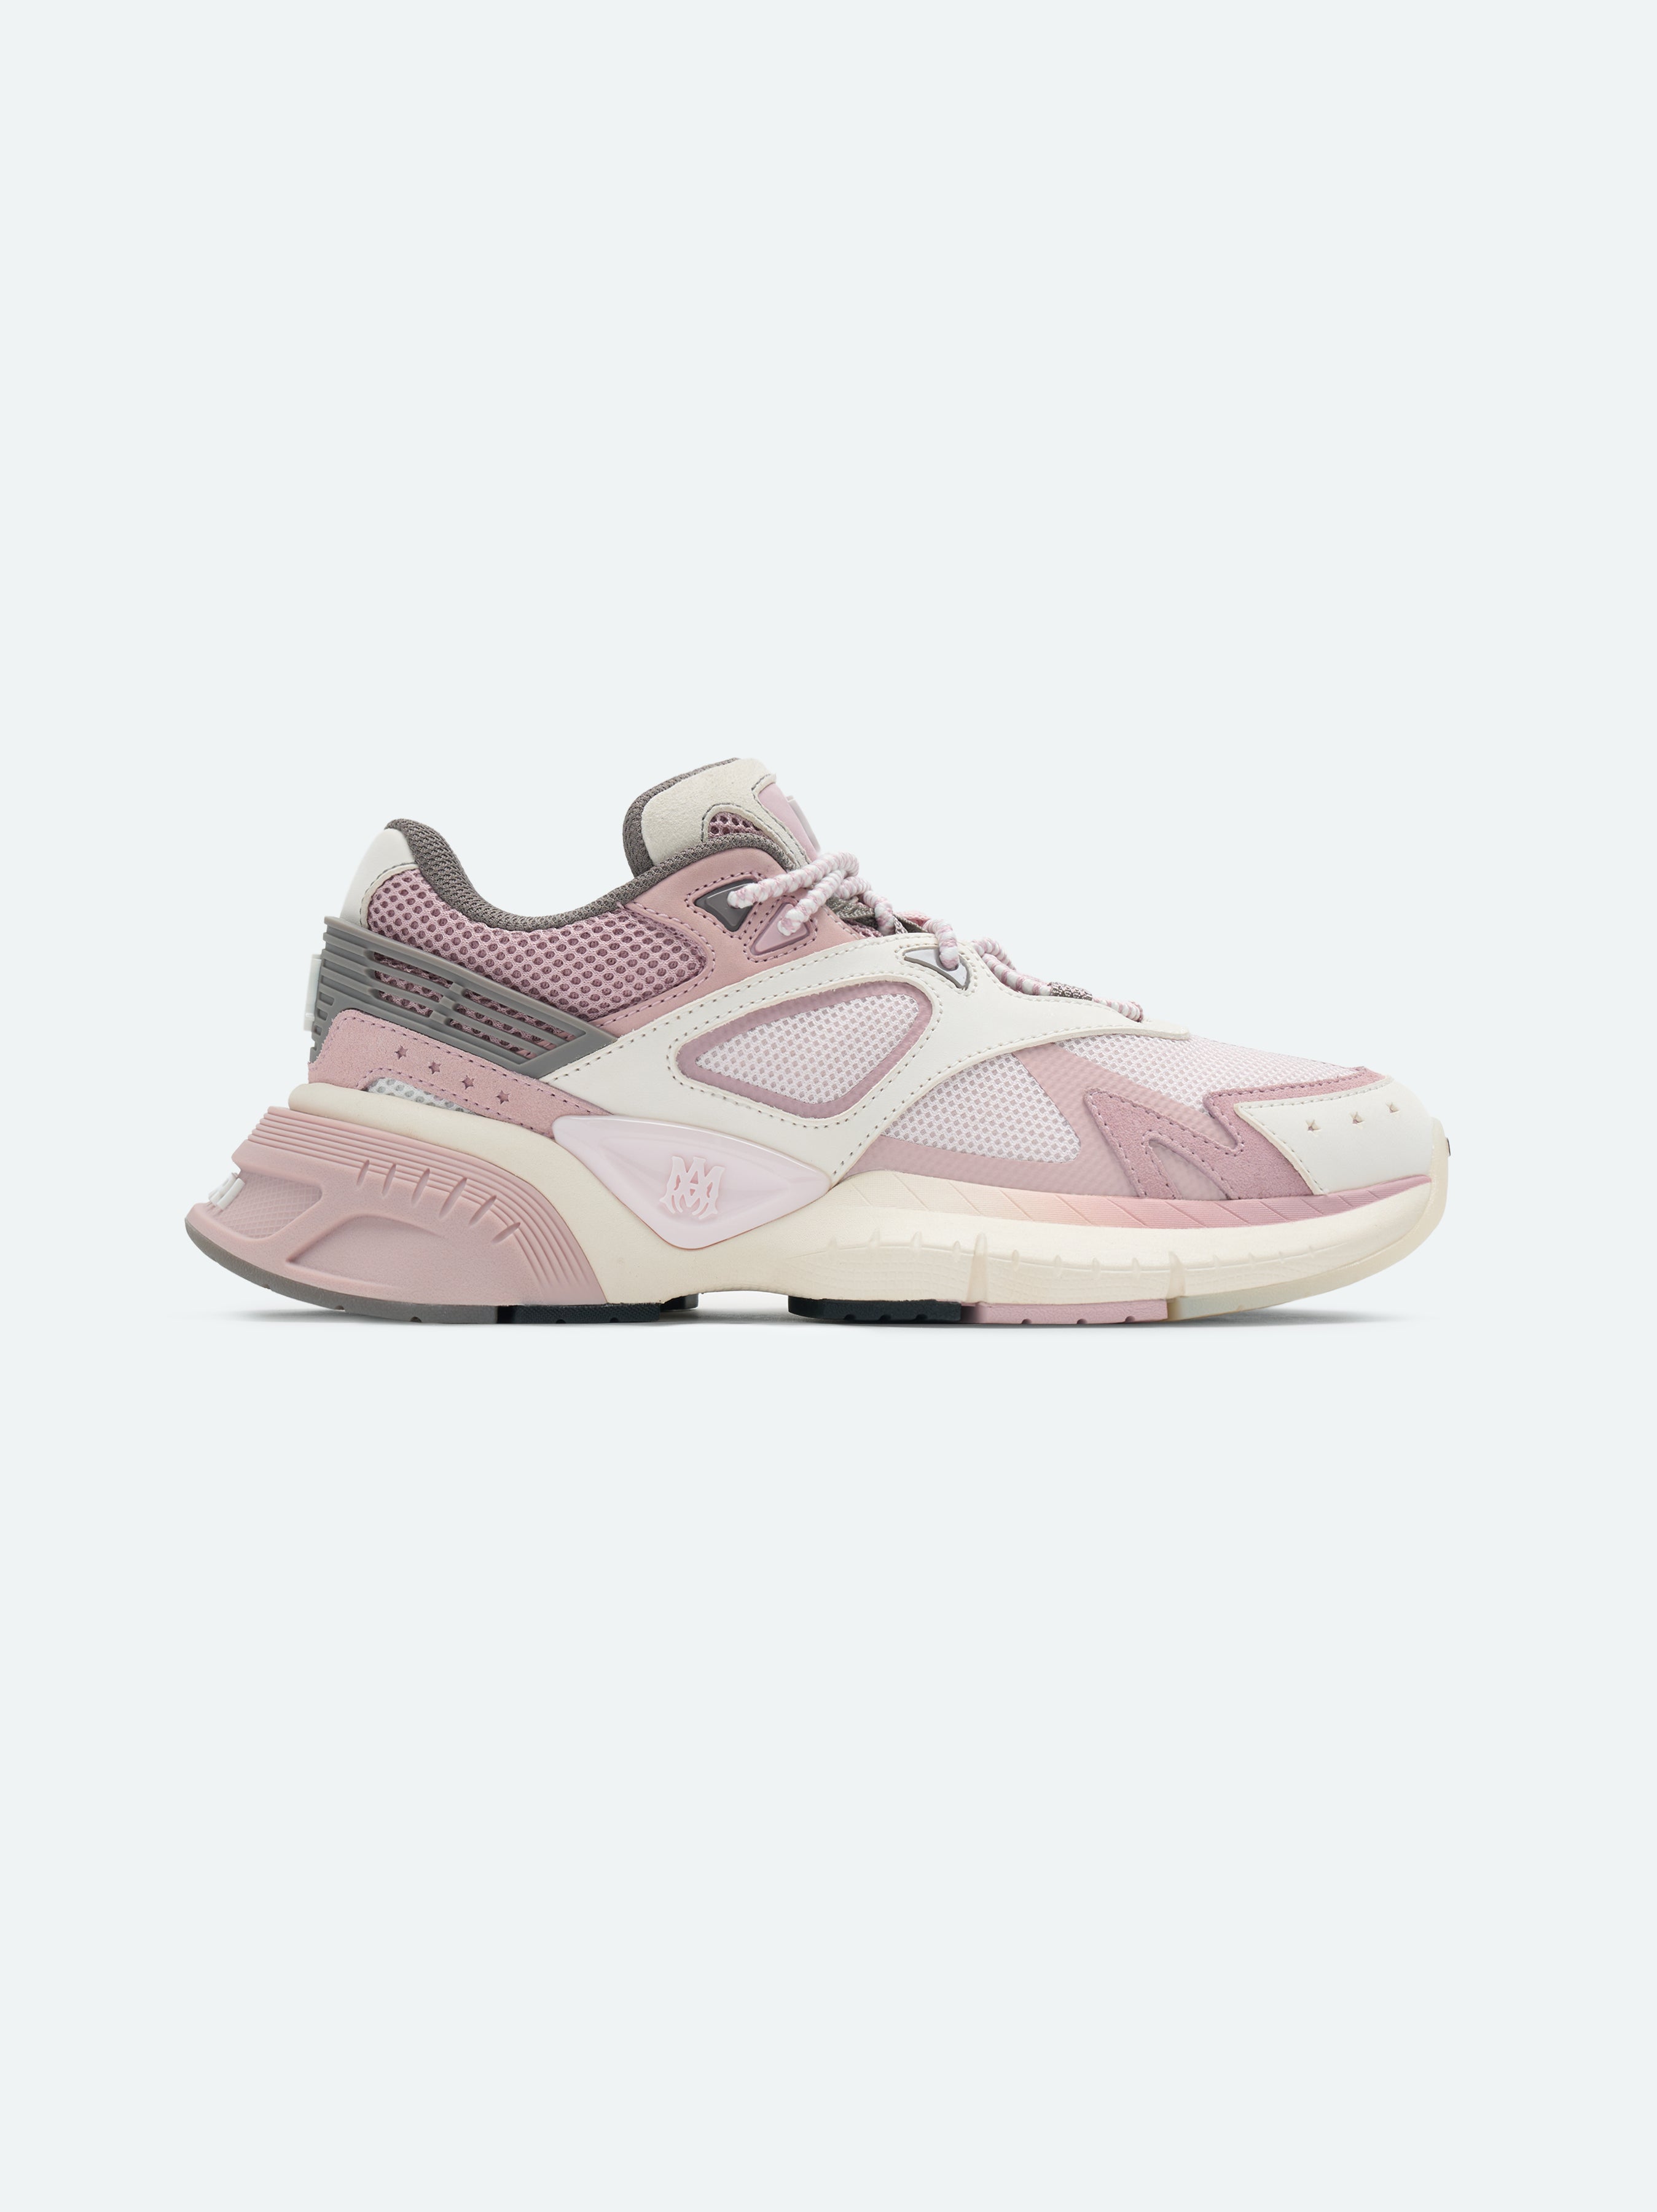 Product WOMEN - MA RUNNER - Pink featured image